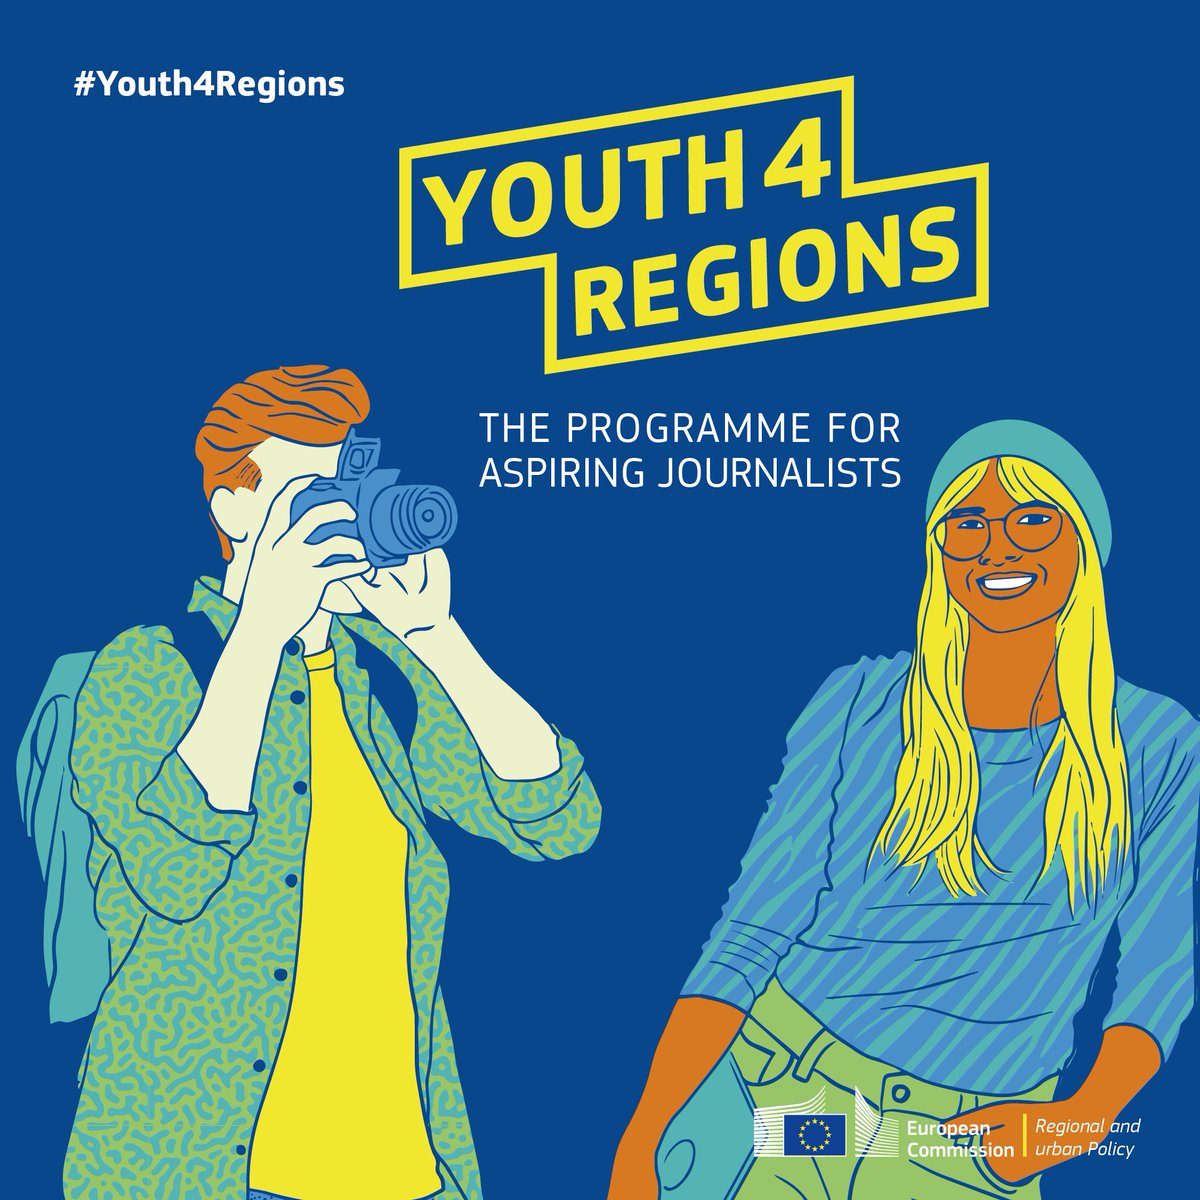 📢The @EU_Commission has opened applications for the new edition of #Youth4Regions, a training programme for aspiring journalists to learn about all things #CohesionPolicy 🇪🇺 ⏰ Closing date is 8 July and more details can be found at the below link 👇 tinyurl.com/3d9kfwv4